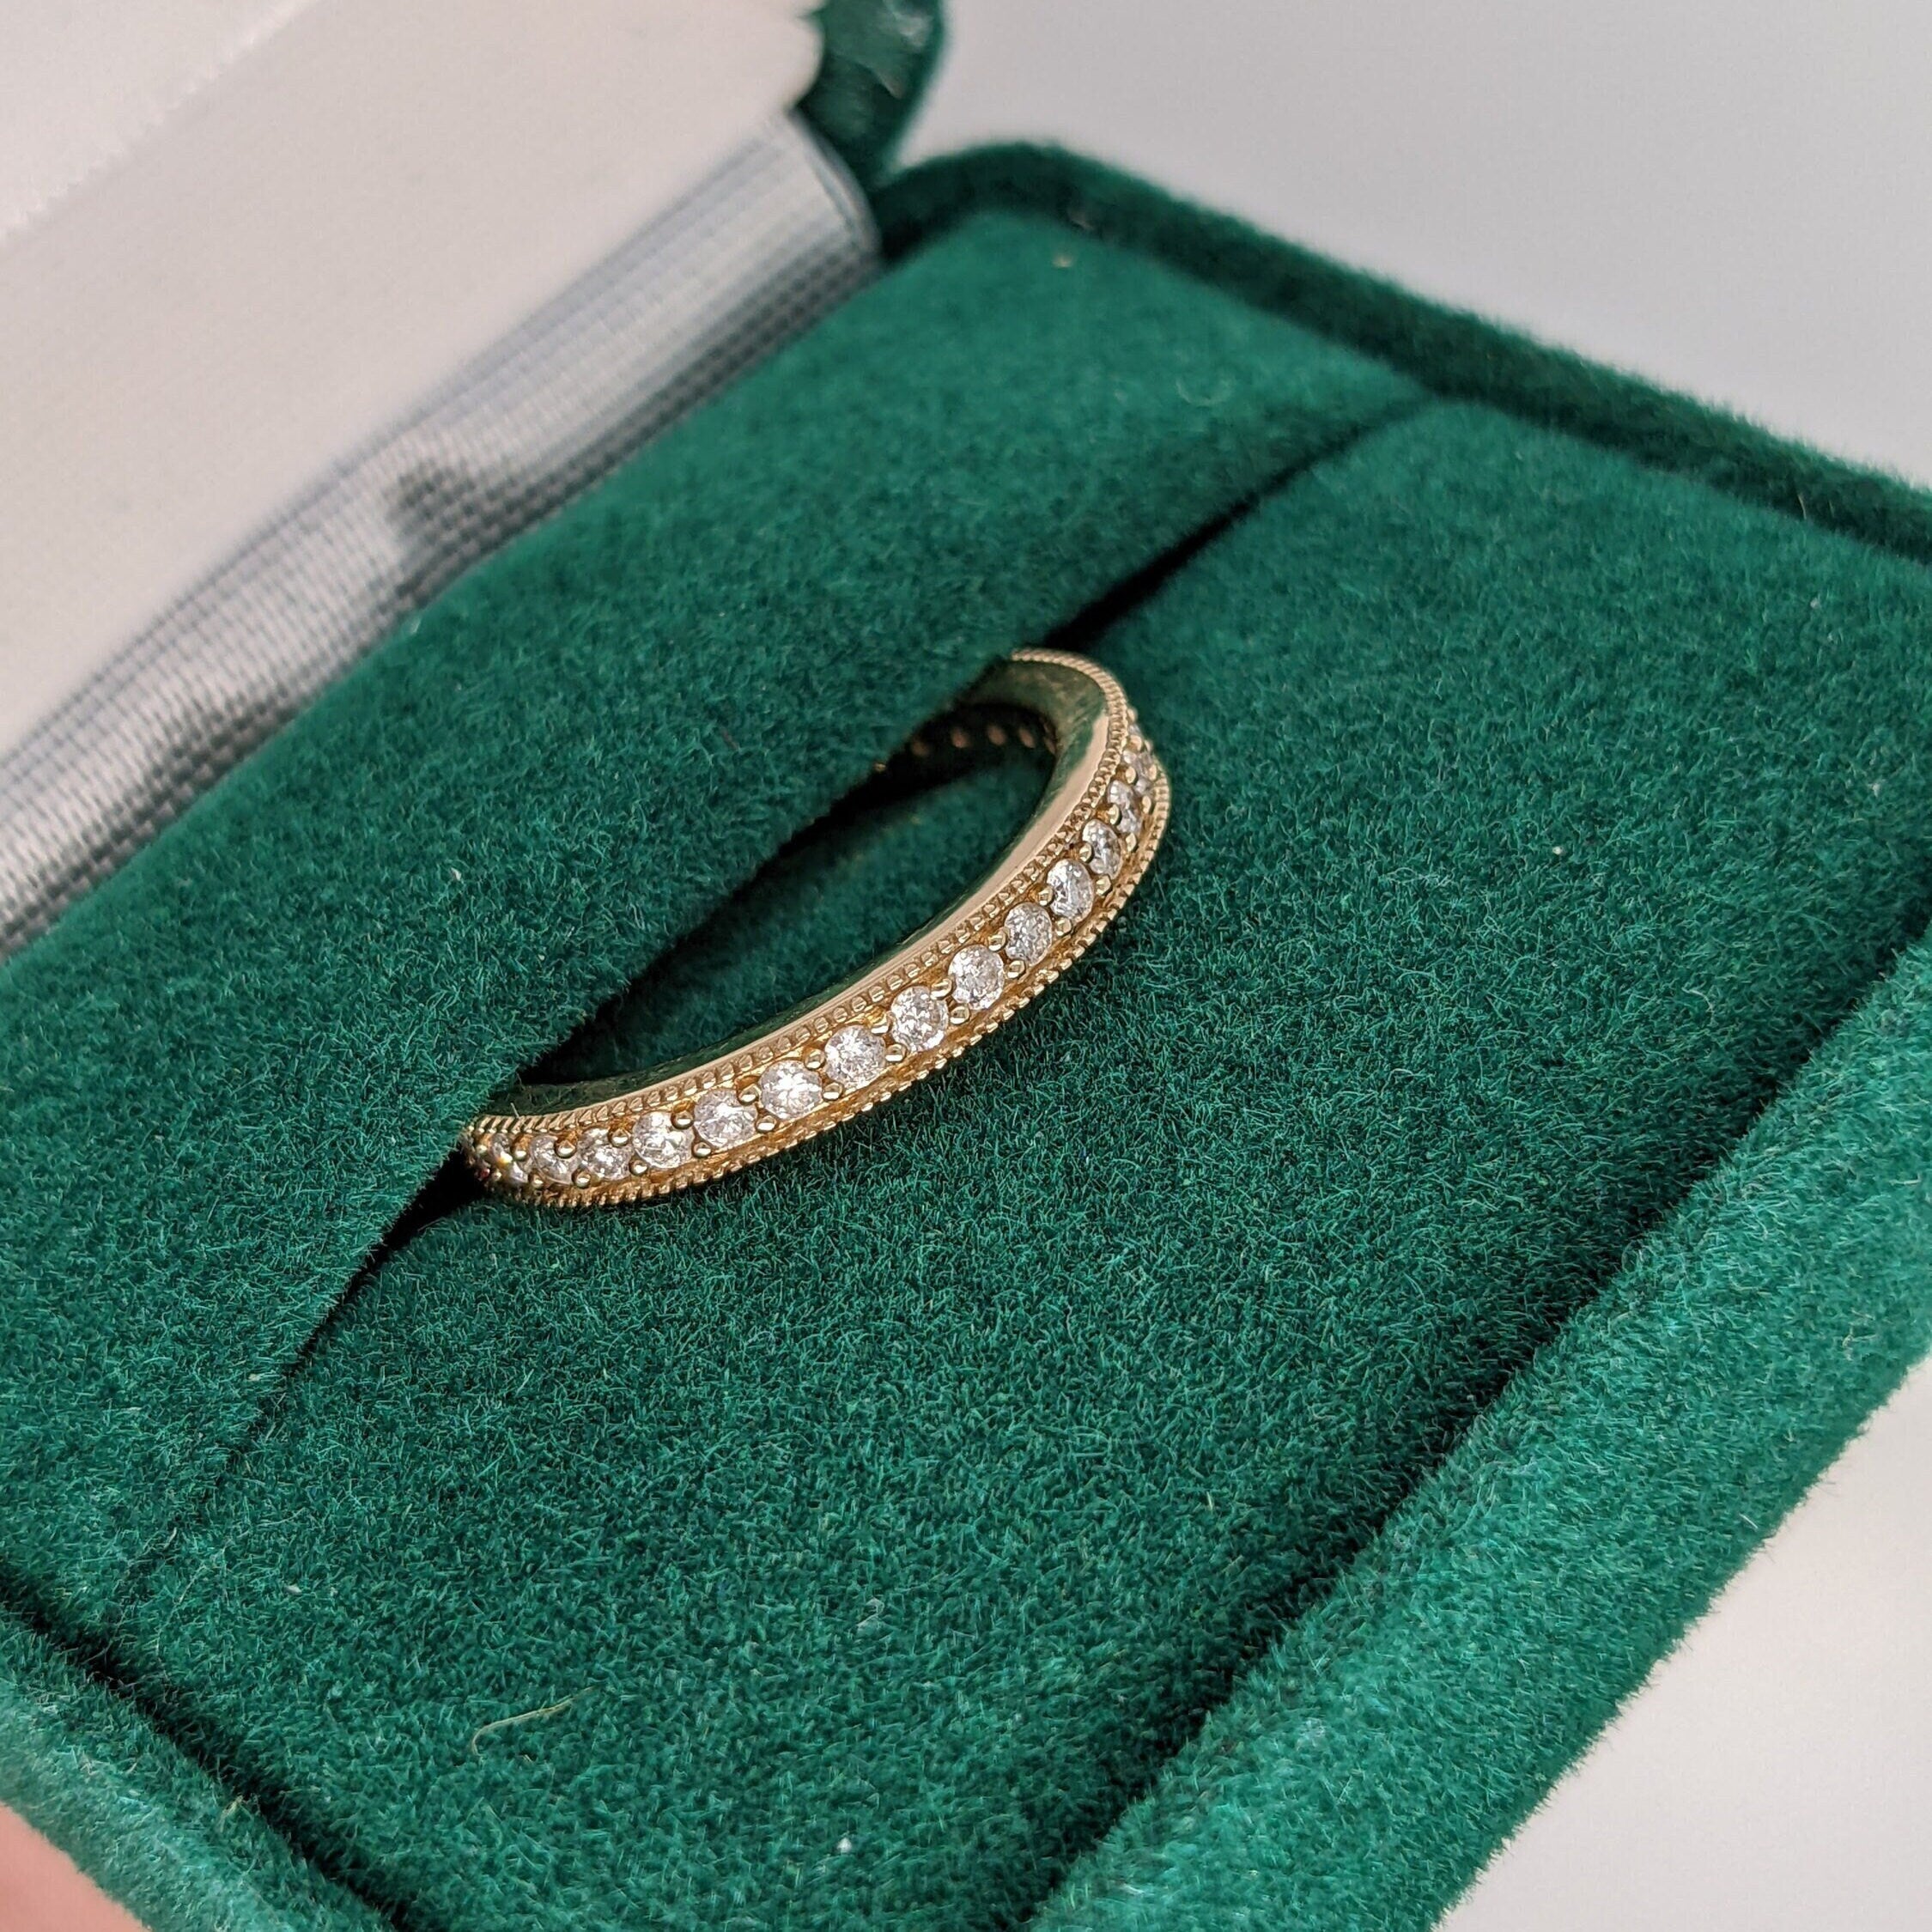 Diamond Eternity Band in Solid 14k Yellow Gold with Milgrain Detailing || Coin Edging || Stackable Band || Wedding Anniversary Engagement